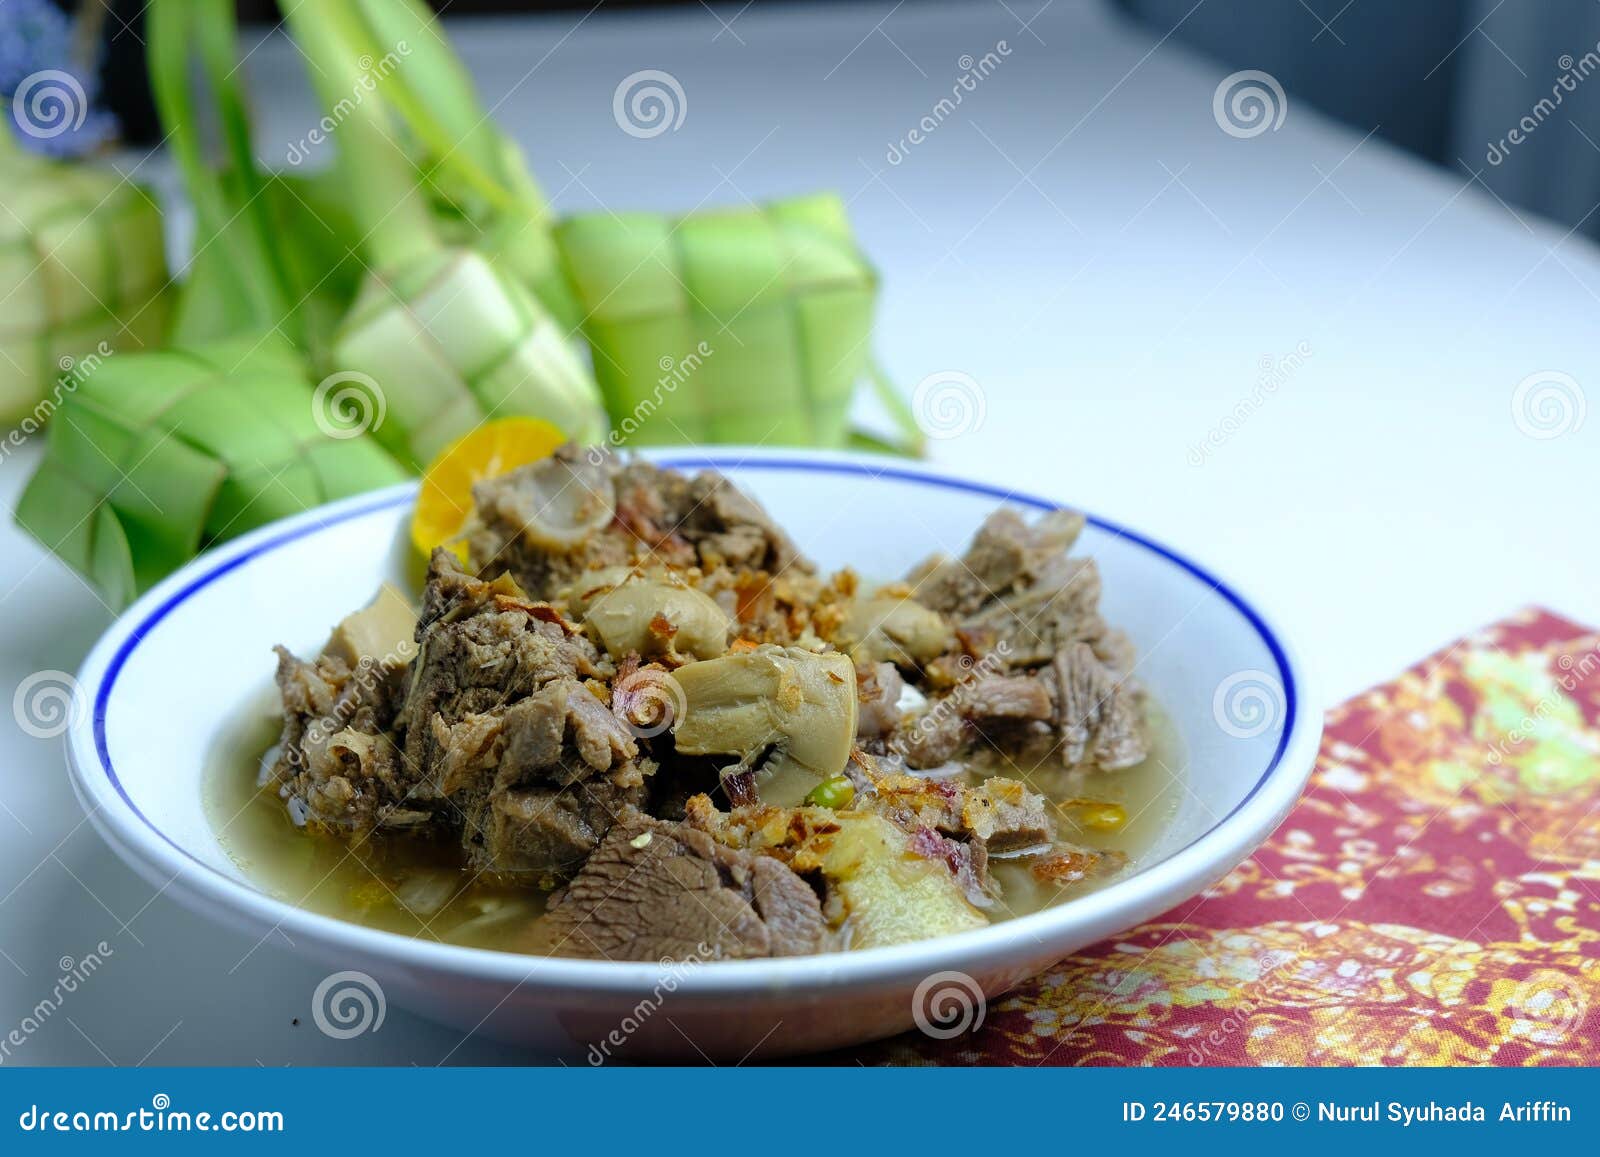 sup tulang - is the malaysian version of bone broths on white bowl delicious